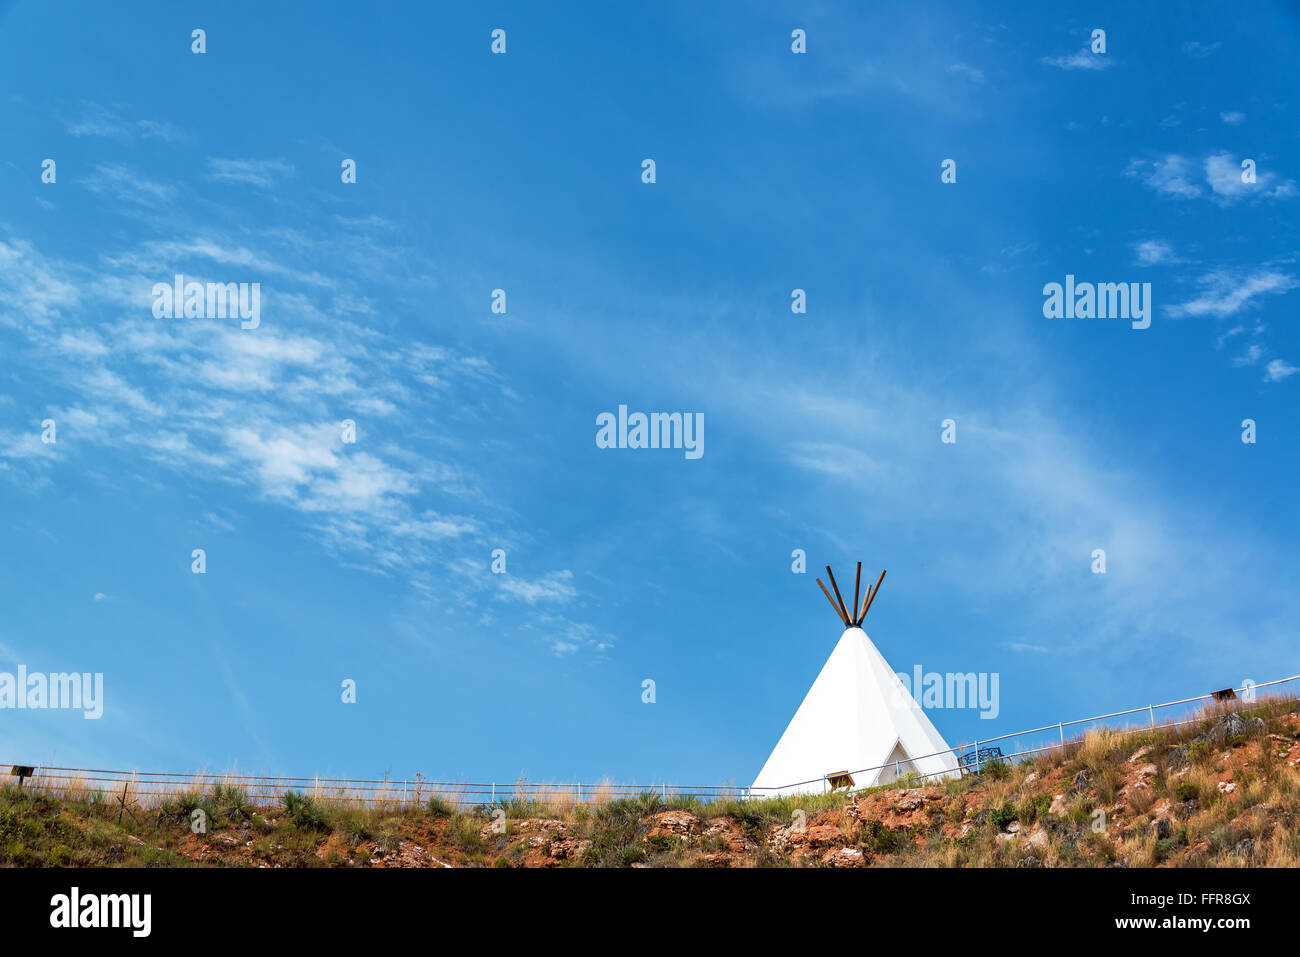 White teepee with a beautiful blue sky near Beulah, Wyoming Stock Photo